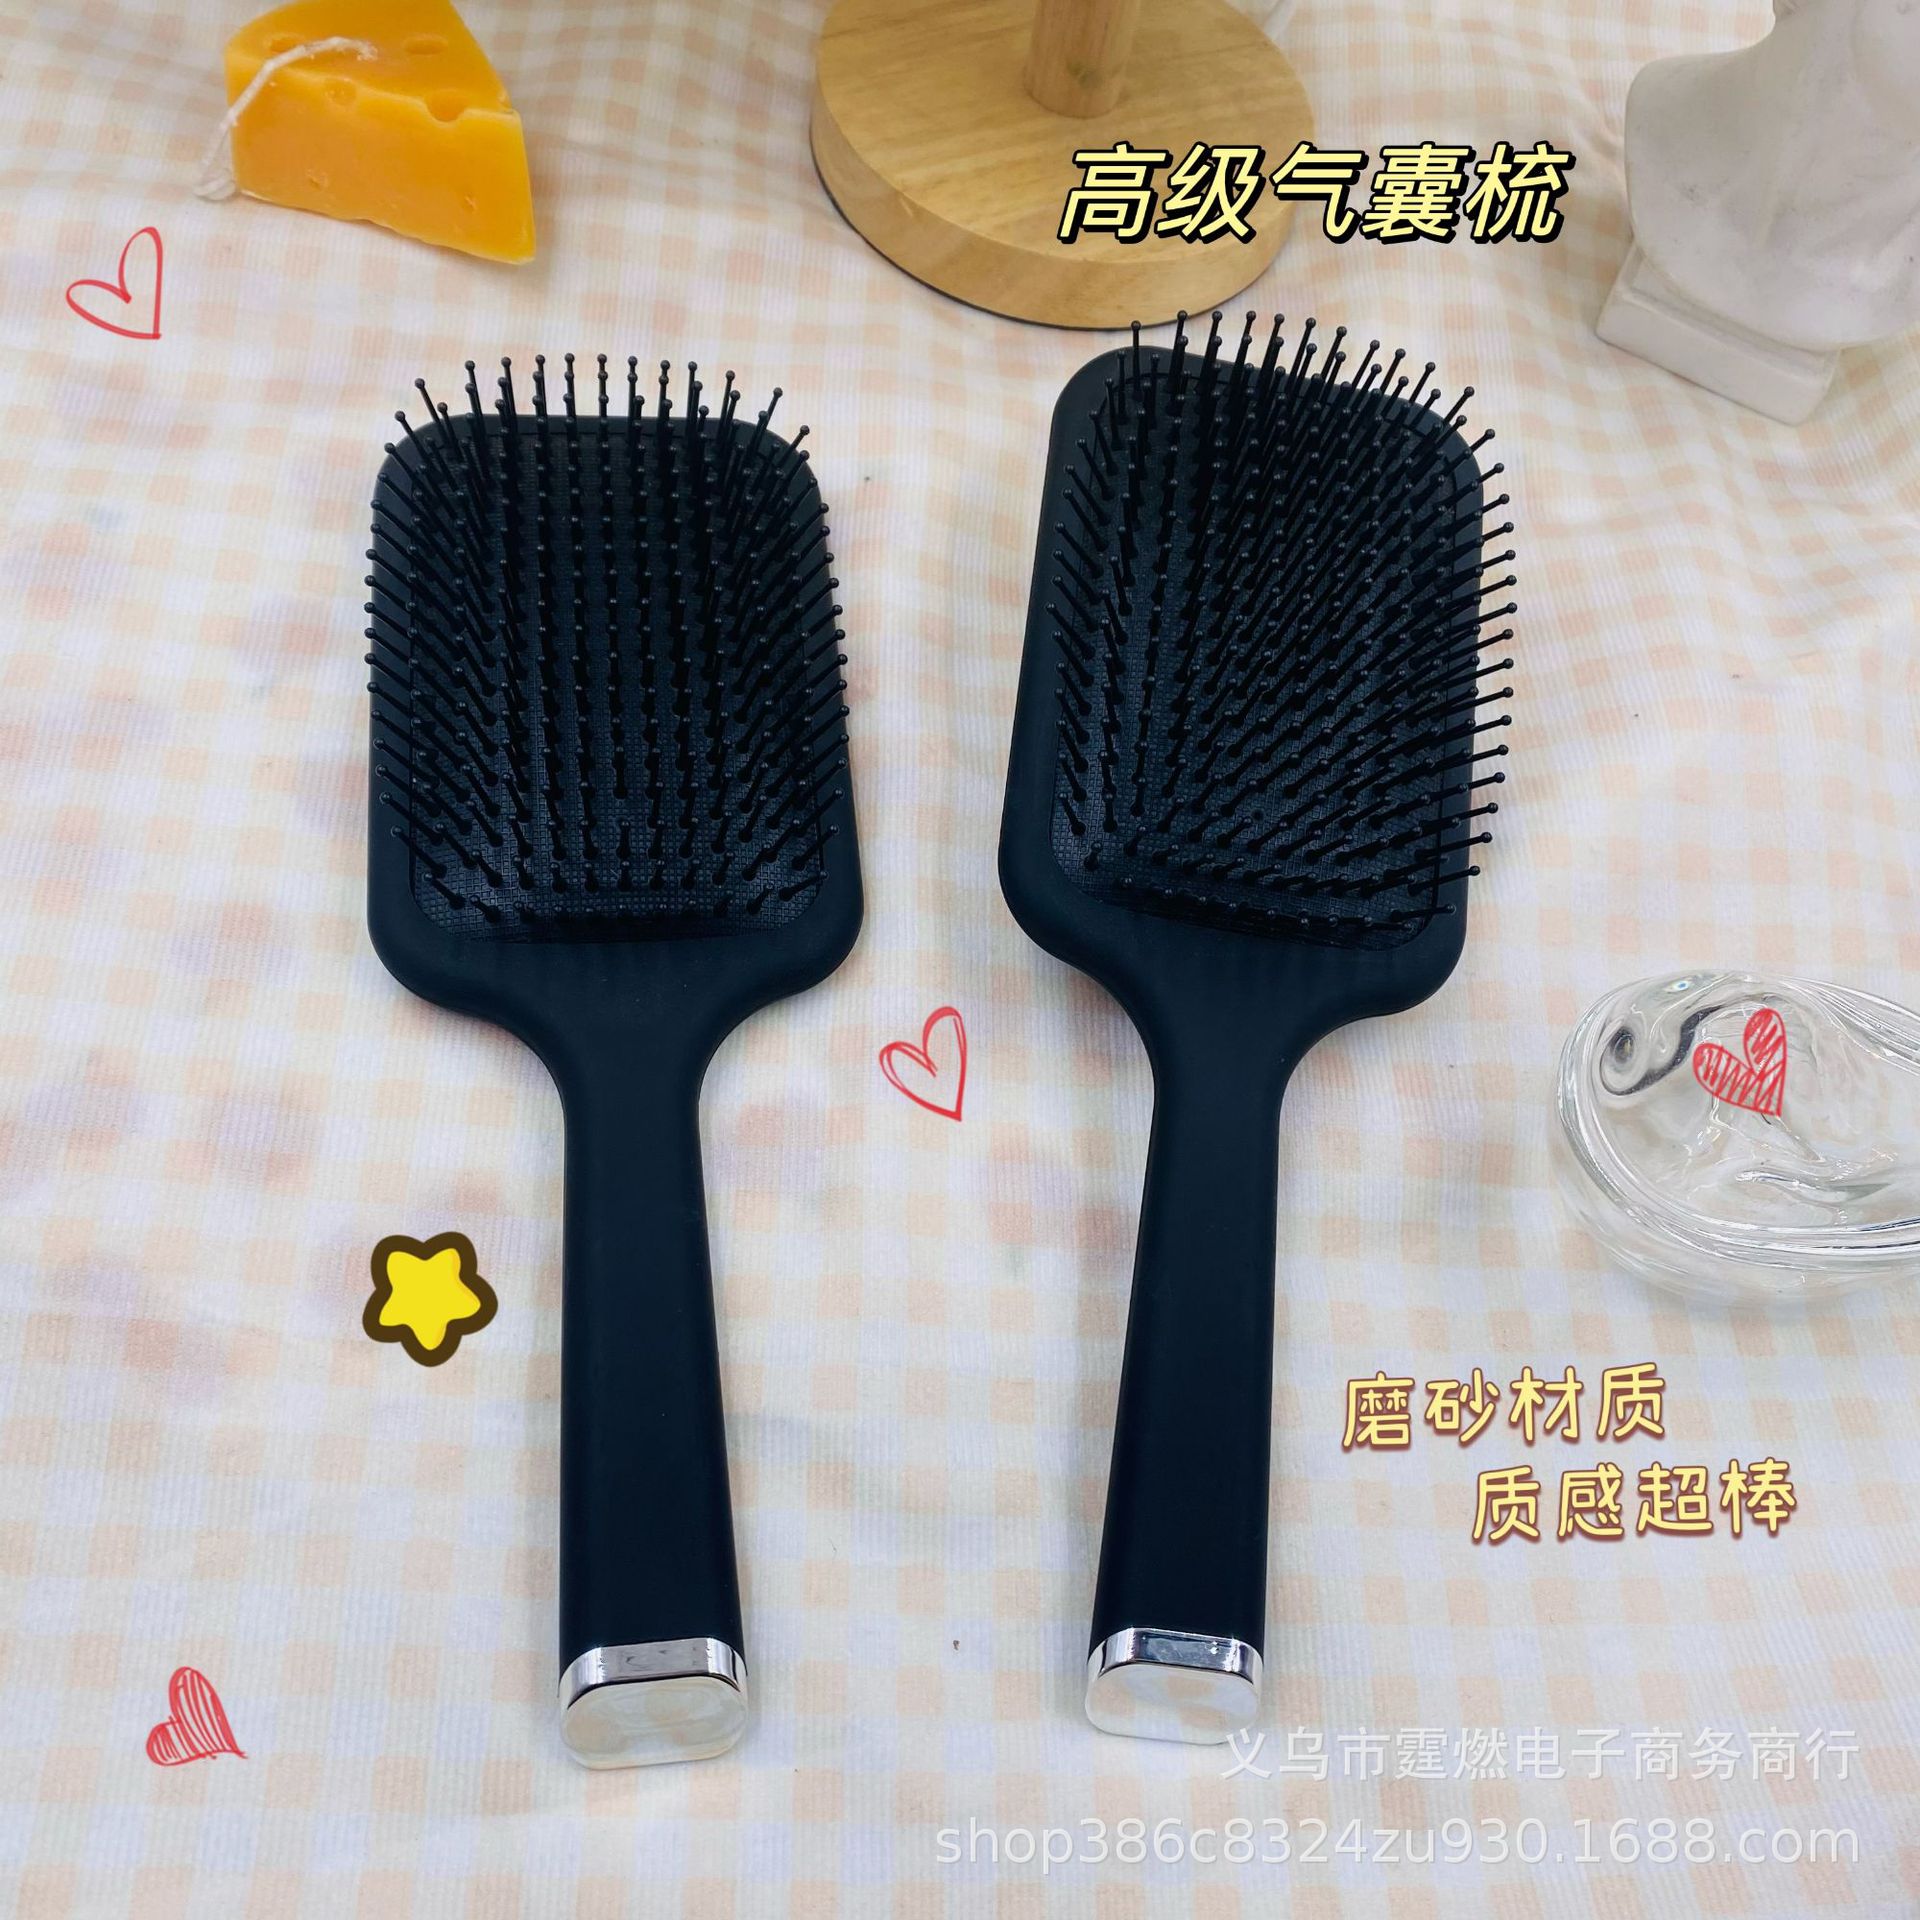 Massage Cushion Black Comb Health Care Anti-Static Air Cushion Comb Internet Celebrity Same General-Purpose Styling Comb Hairdressing Comb